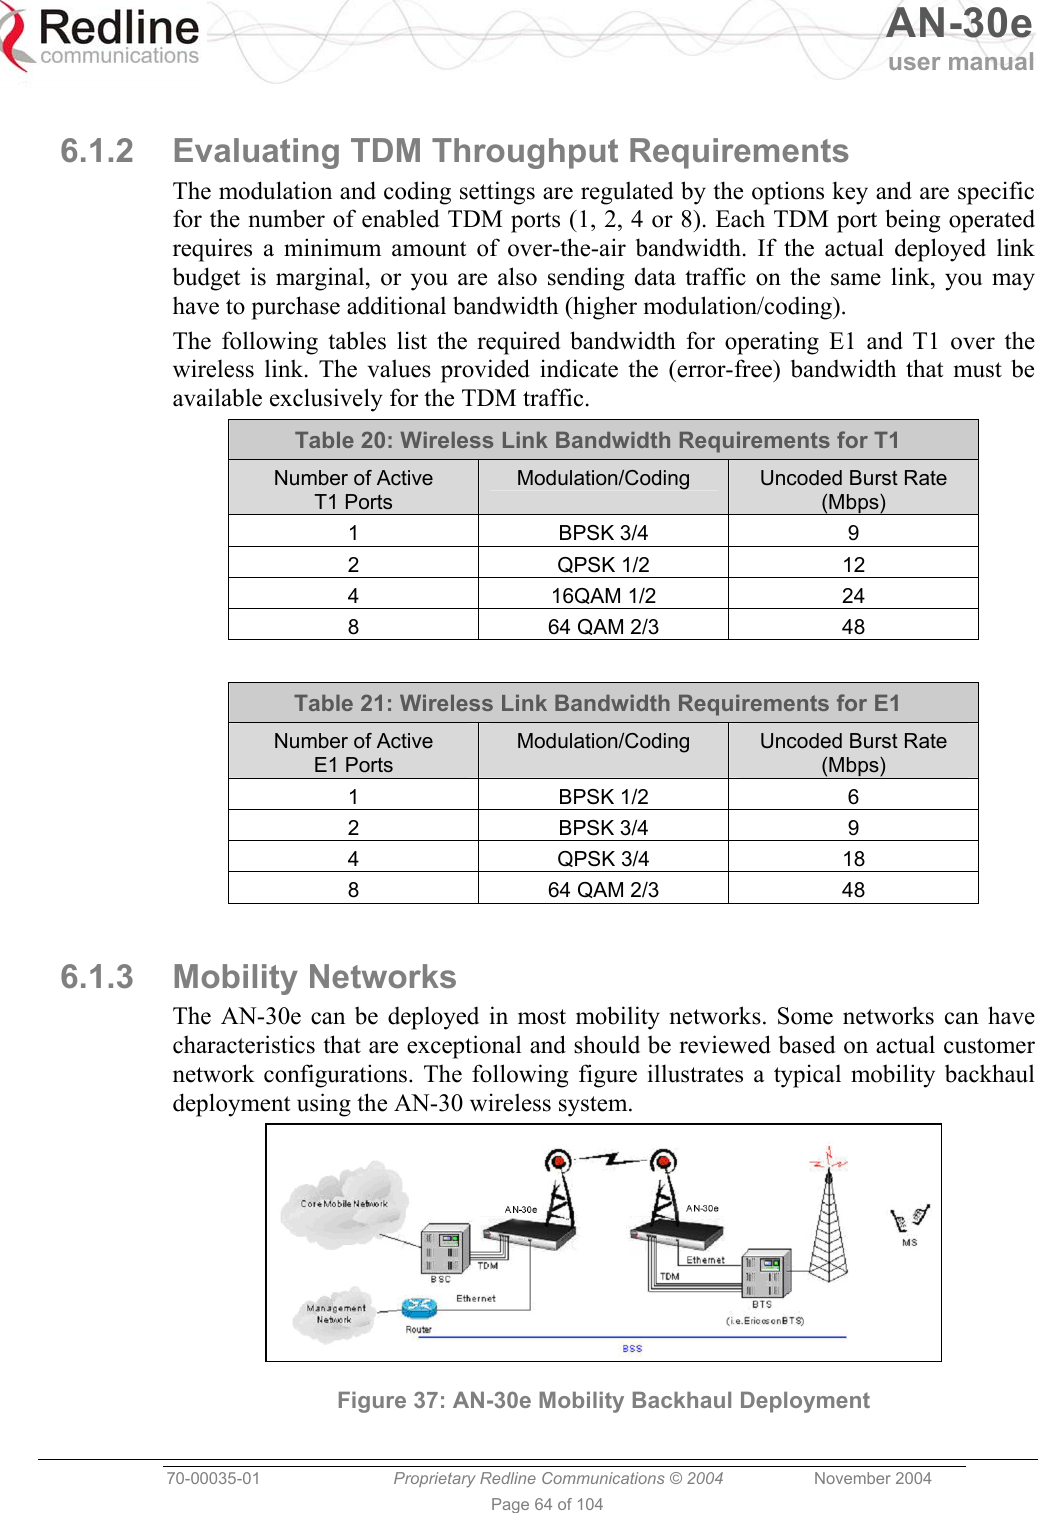   AN-30e user manual  70-00035-01  Proprietary Redline Communications © 2004 November 2004   Page 64 of 104  6.1.2  Evaluating TDM Throughput Requirements The modulation and coding settings are regulated by the options key and are specific for the number of enabled TDM ports (1, 2, 4 or 8). Each TDM port being operated requires a minimum amount of over-the-air bandwidth. If the actual deployed link budget is marginal, or you are also sending data traffic on the same link, you may have to purchase additional bandwidth (higher modulation/coding). The following tables list the required bandwidth for operating E1 and T1 over the wireless link. The values provided indicate the (error-free) bandwidth that must be available exclusively for the TDM traffic. Table 20: Wireless Link Bandwidth Requirements for T1 Number of Active T1 Ports Modulation/Coding  Uncoded Burst Rate (Mbps) 1 BPSK 3/4 9 2 QPSK 1/2 12 4 16QAM 1/2 24 8  64 QAM 2/3  48  Table 21: Wireless Link Bandwidth Requirements for E1 Number of Active E1 Ports Modulation/Coding  Uncoded Burst Rate (Mbps) 1 BPSK 1/2 6 2 BPSK 3/4 9 4 QPSK 3/4 18 8  64 QAM 2/3  48  6.1.3 Mobility Networks The AN-30e can be deployed in most mobility networks. Some networks can have characteristics that are exceptional and should be reviewed based on actual customer network configurations. The following figure illustrates a typical mobility backhaul deployment using the AN-30 wireless system.  Figure 37: AN-30e Mobility Backhaul Deployment 